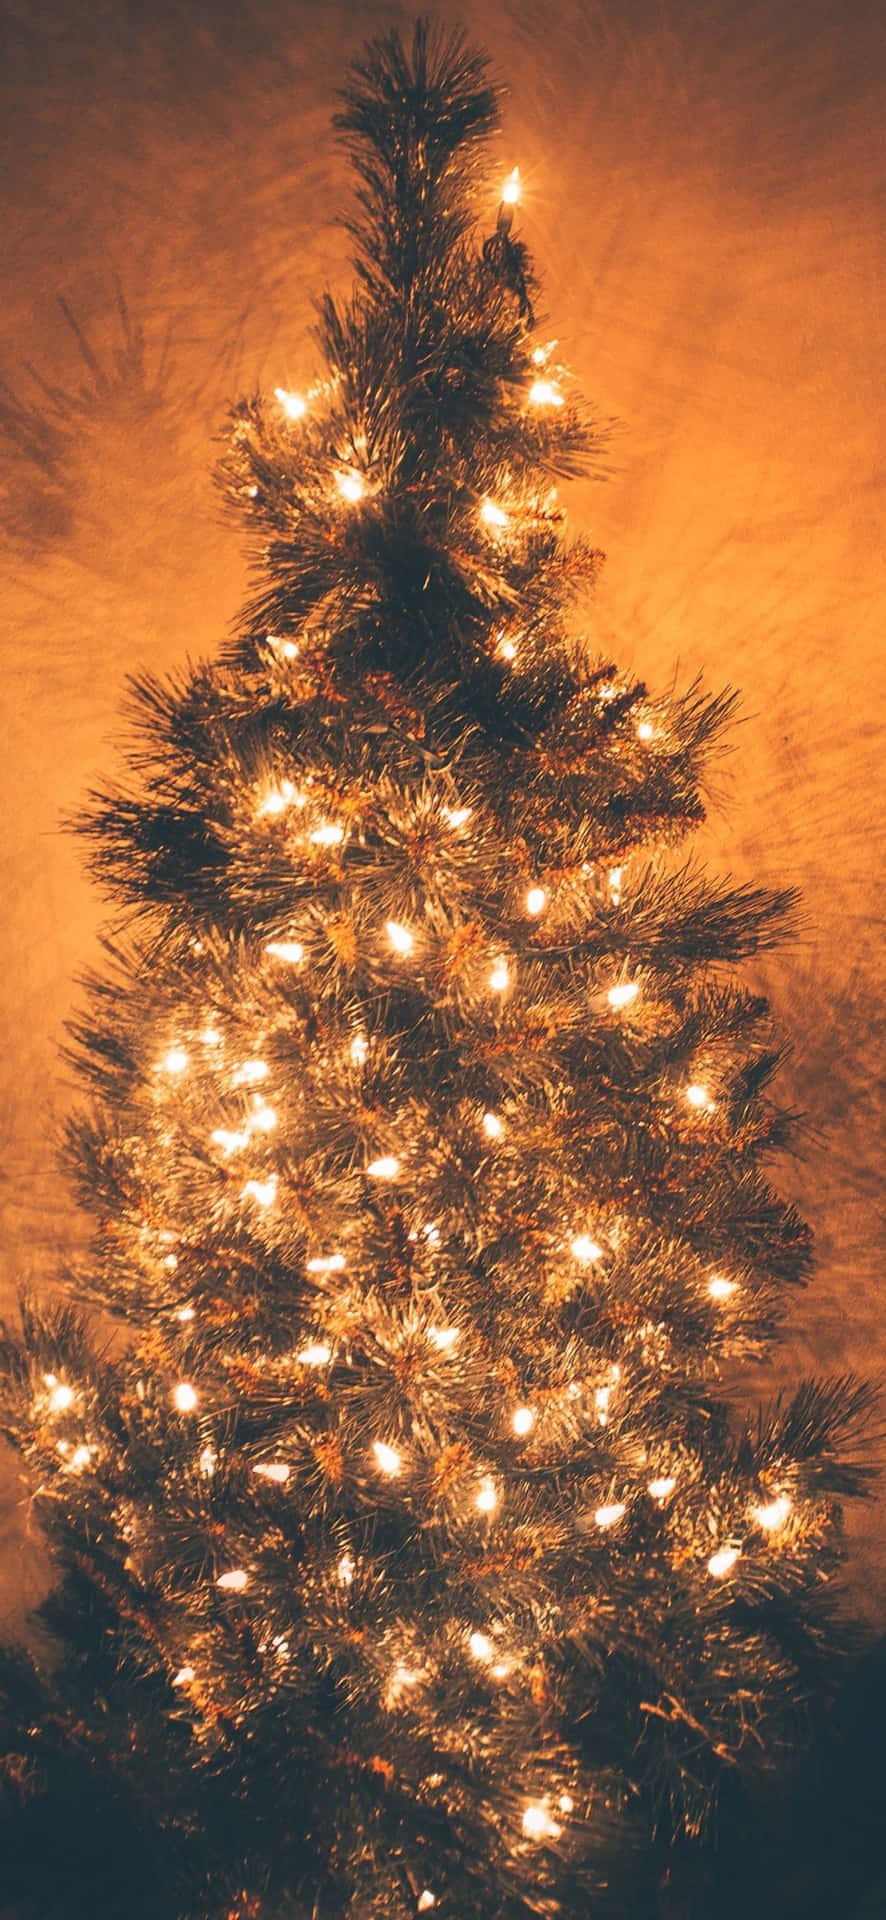 Enjoy a Magical Holiday Season with this Christmas Themed iPhone Wallpaper